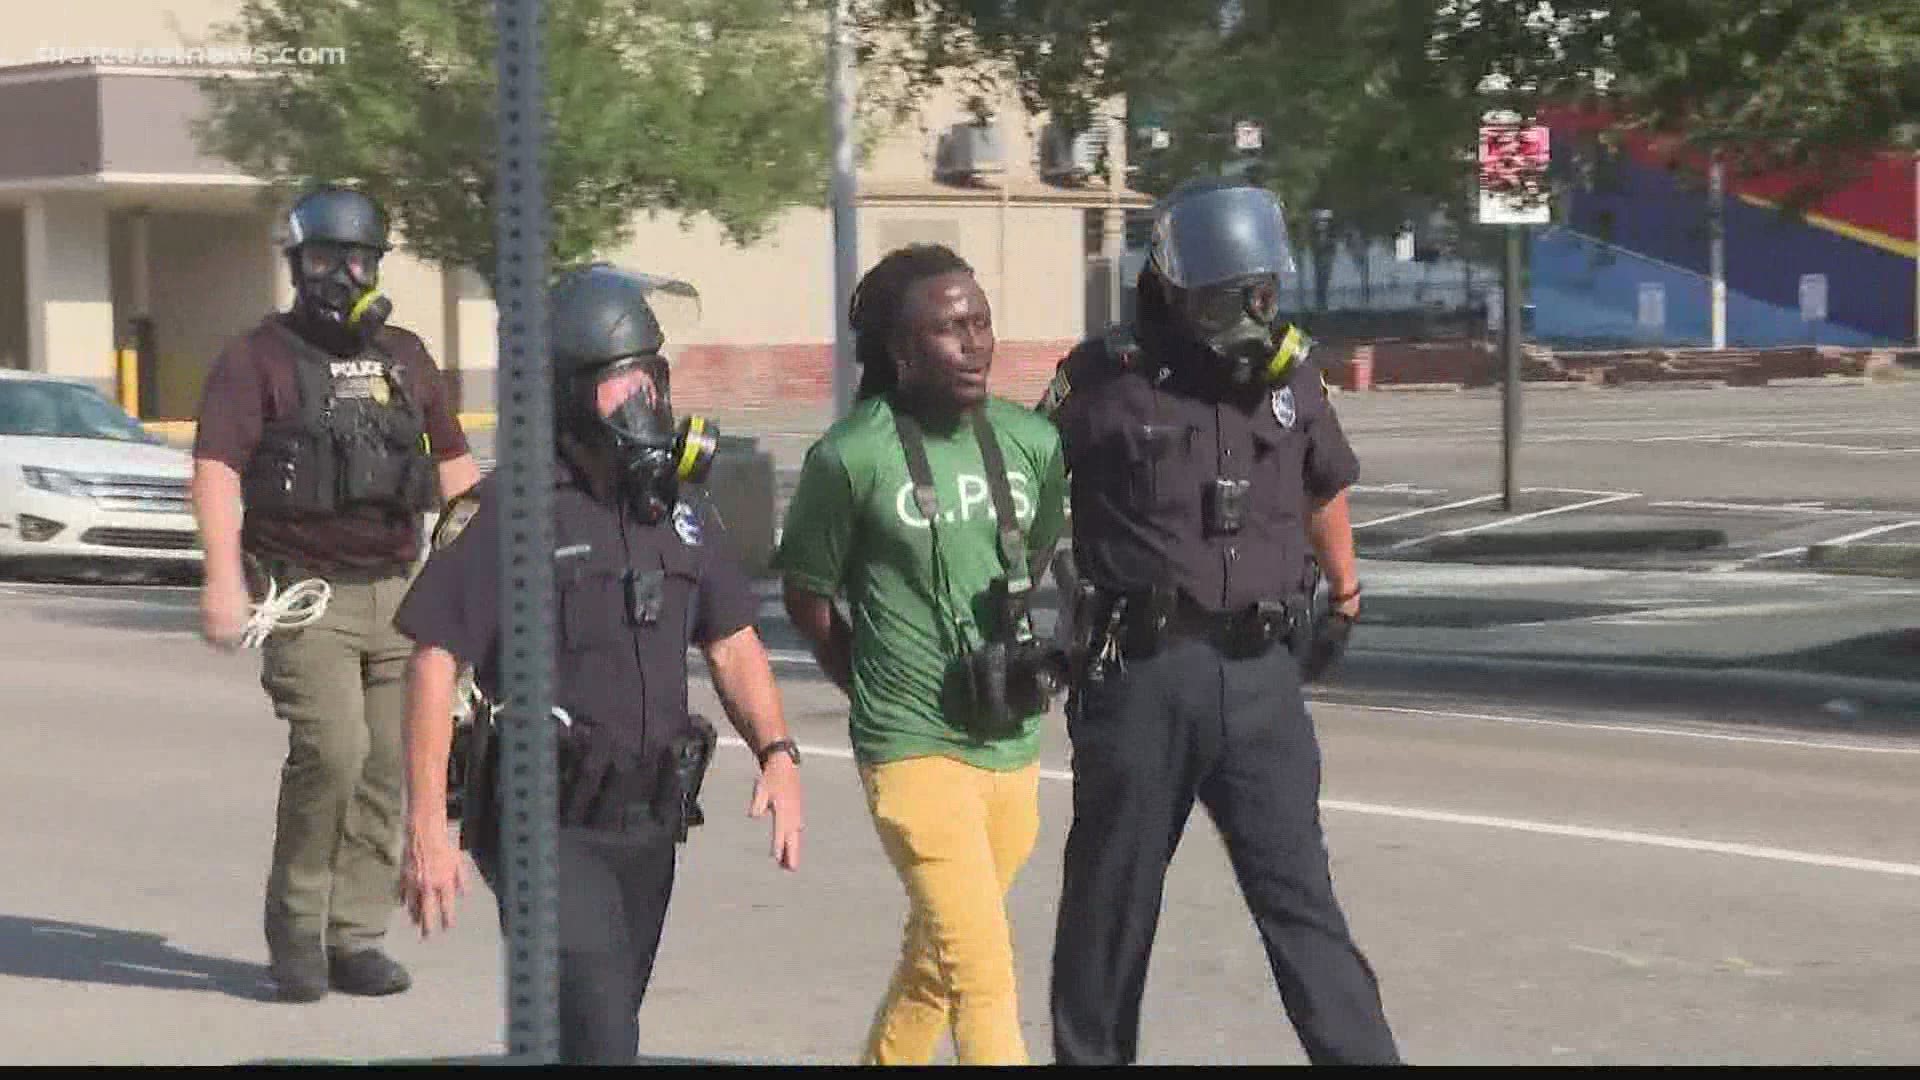 The Florida Times-Union reported multiple protesters were arrested after what appeared to be an attempt to shut down the Main Street Bridge.